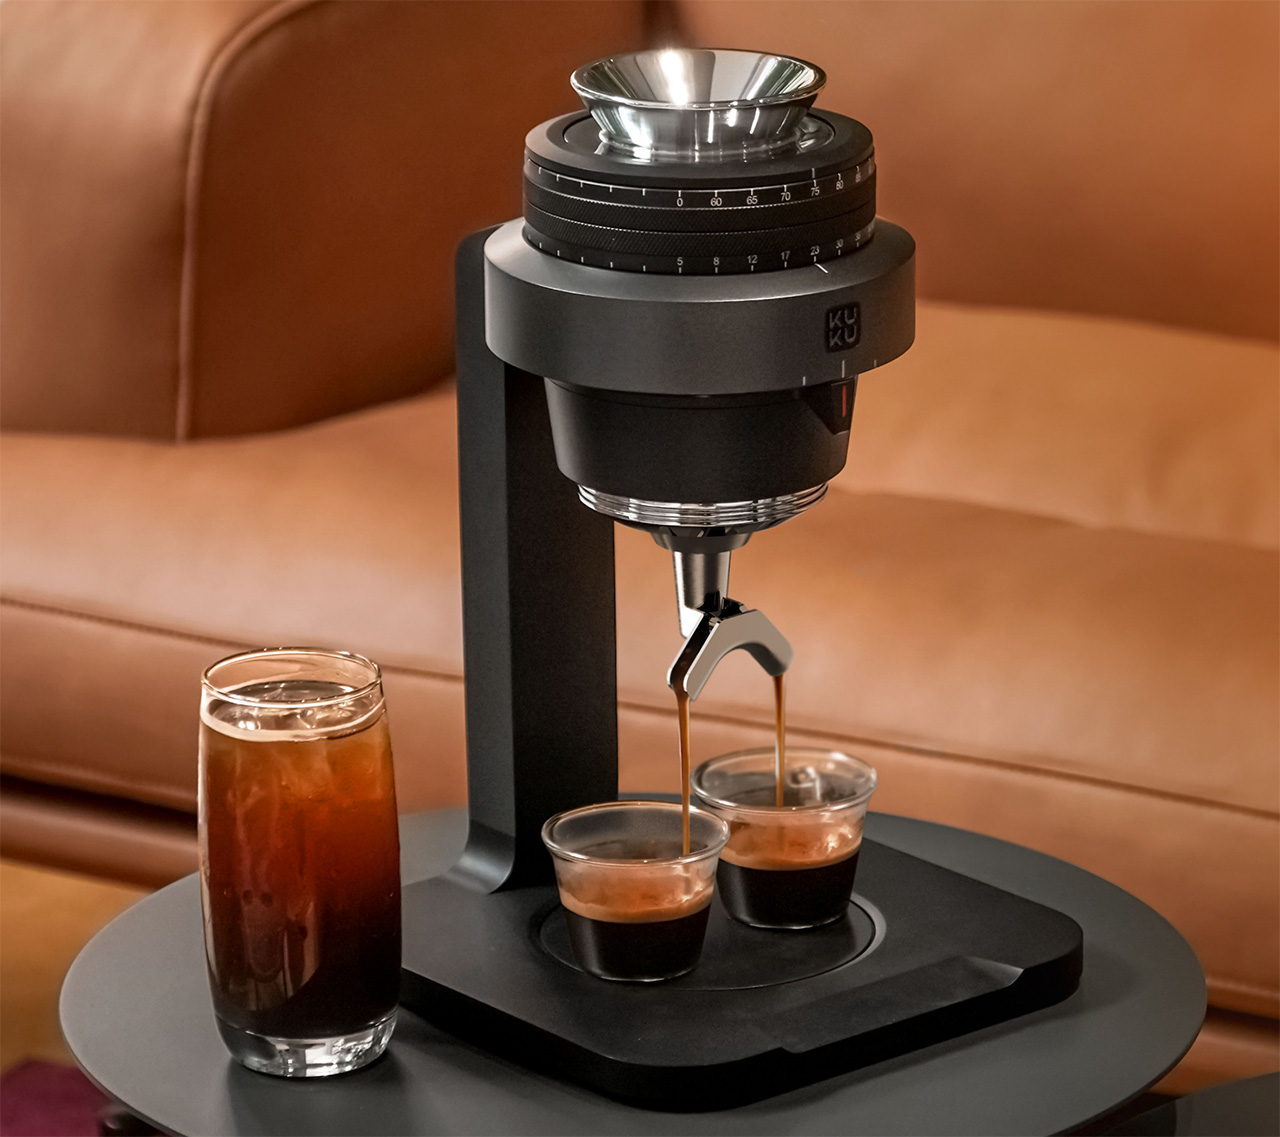 KUKU Maker: Master Your Coffee, Any Brew, Any Mood